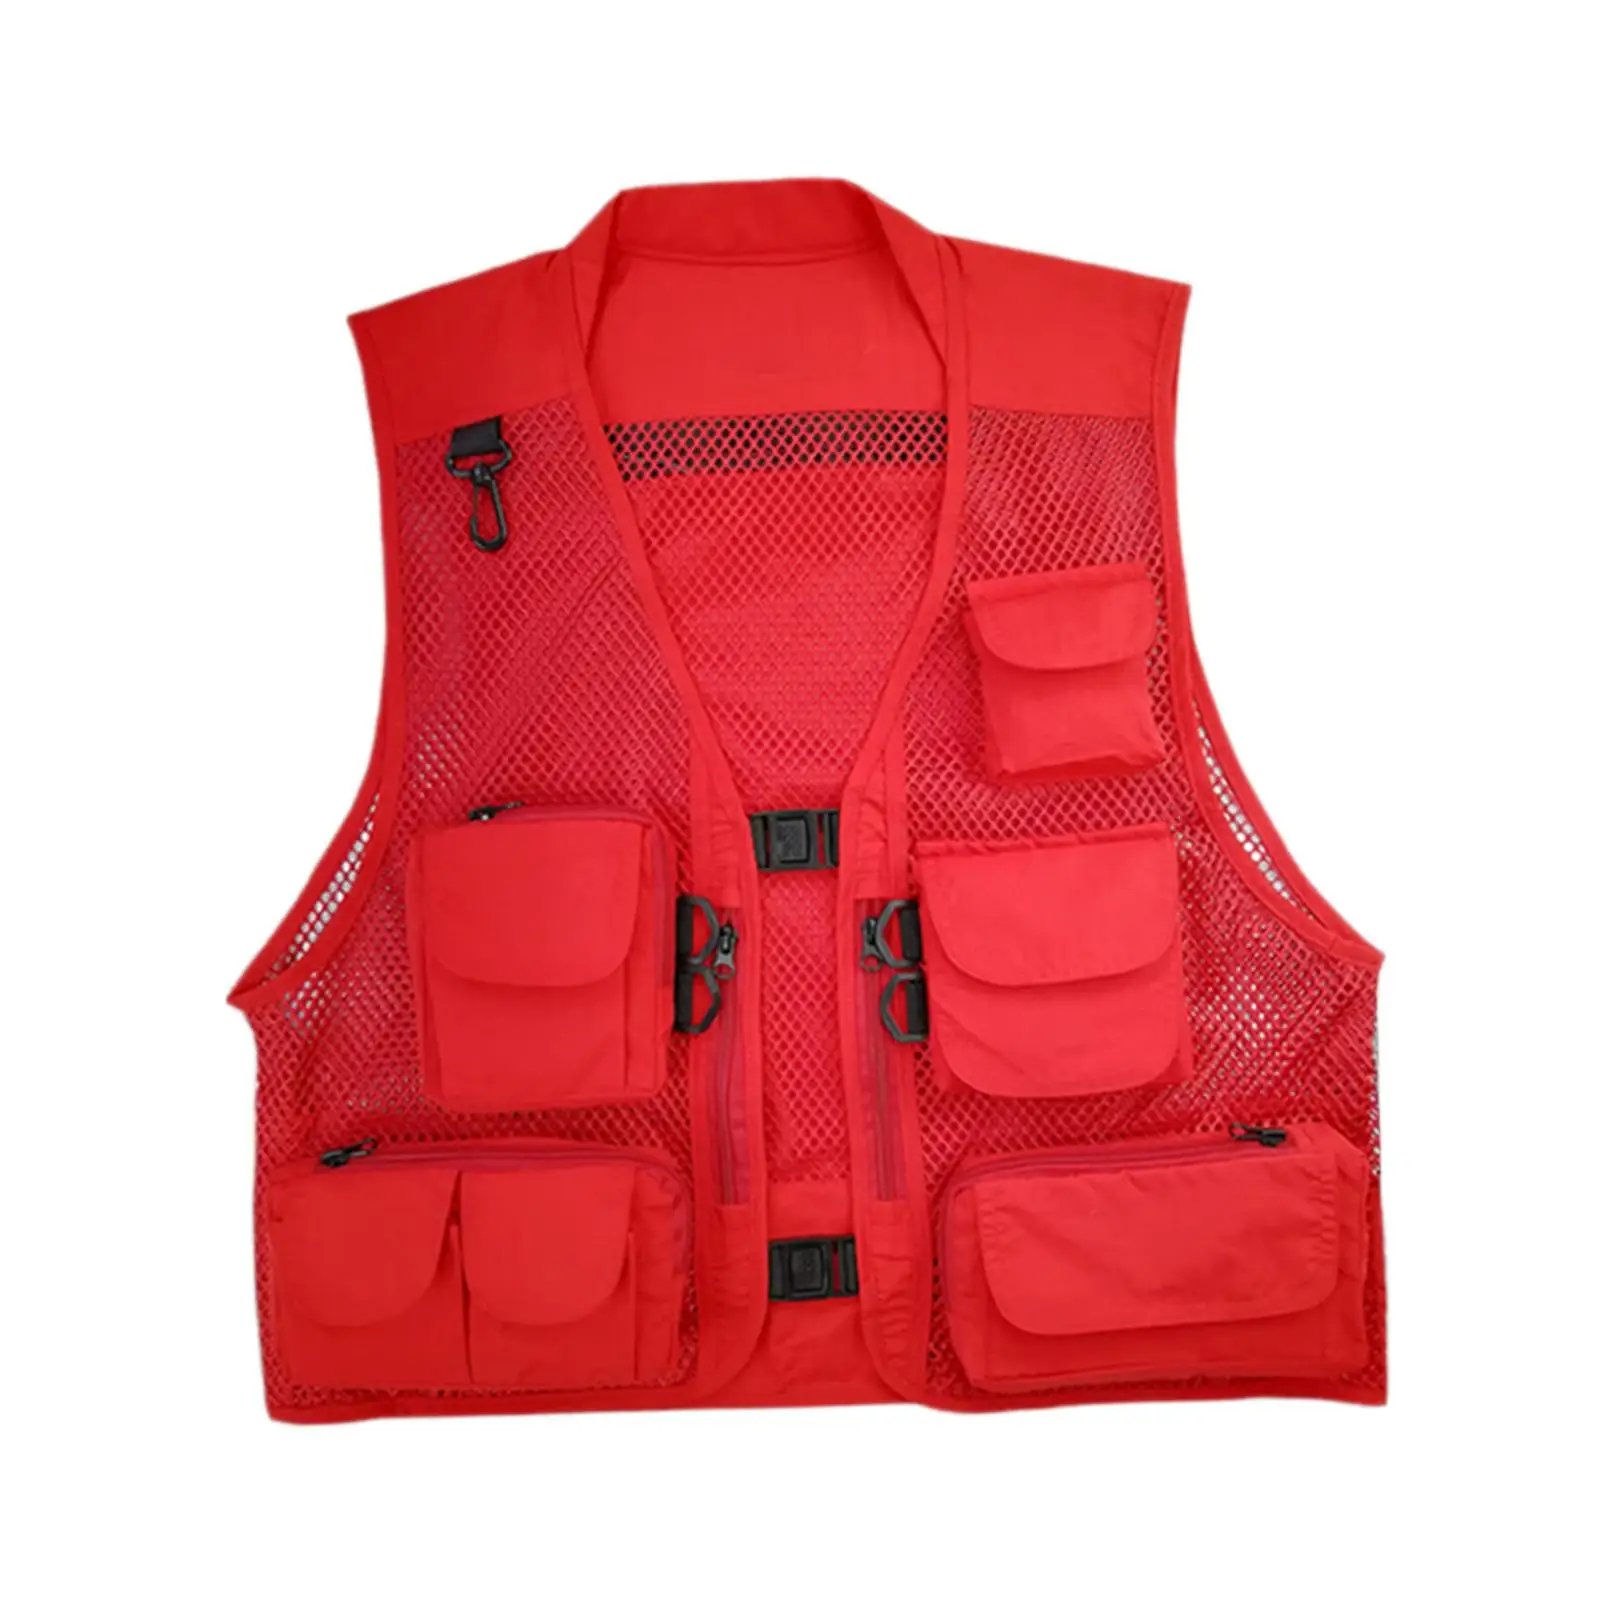 Mesh Fishing Photography Vest Multiple Pockets Red Comfortable for